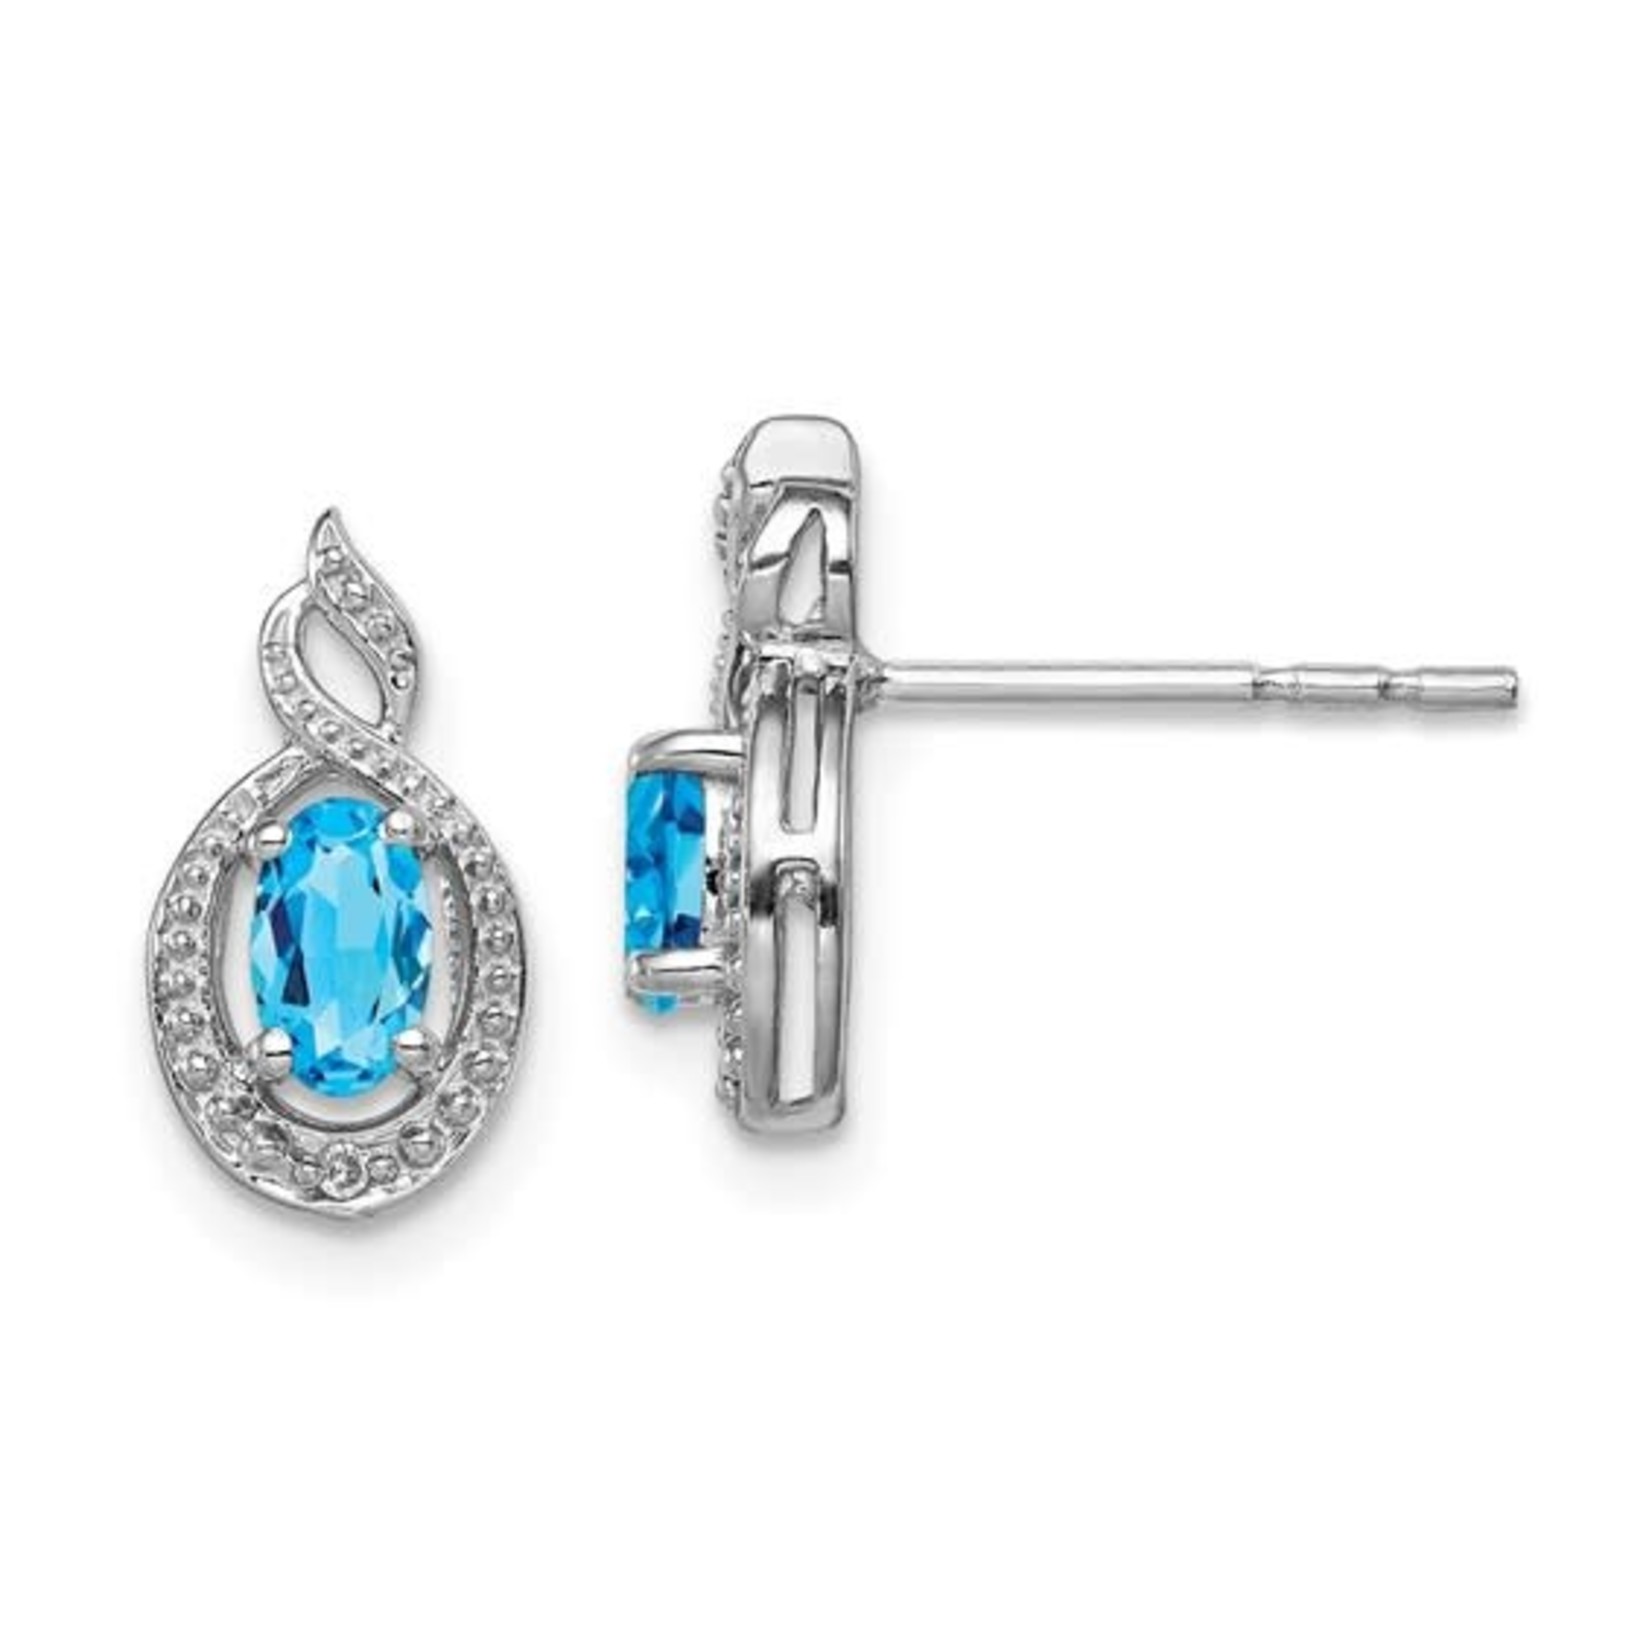 QUALITY GOLD OF CINCINNATI INC Sterling Silver Rhodium Plated Swiss Blue Topaz and Diamond Earrings